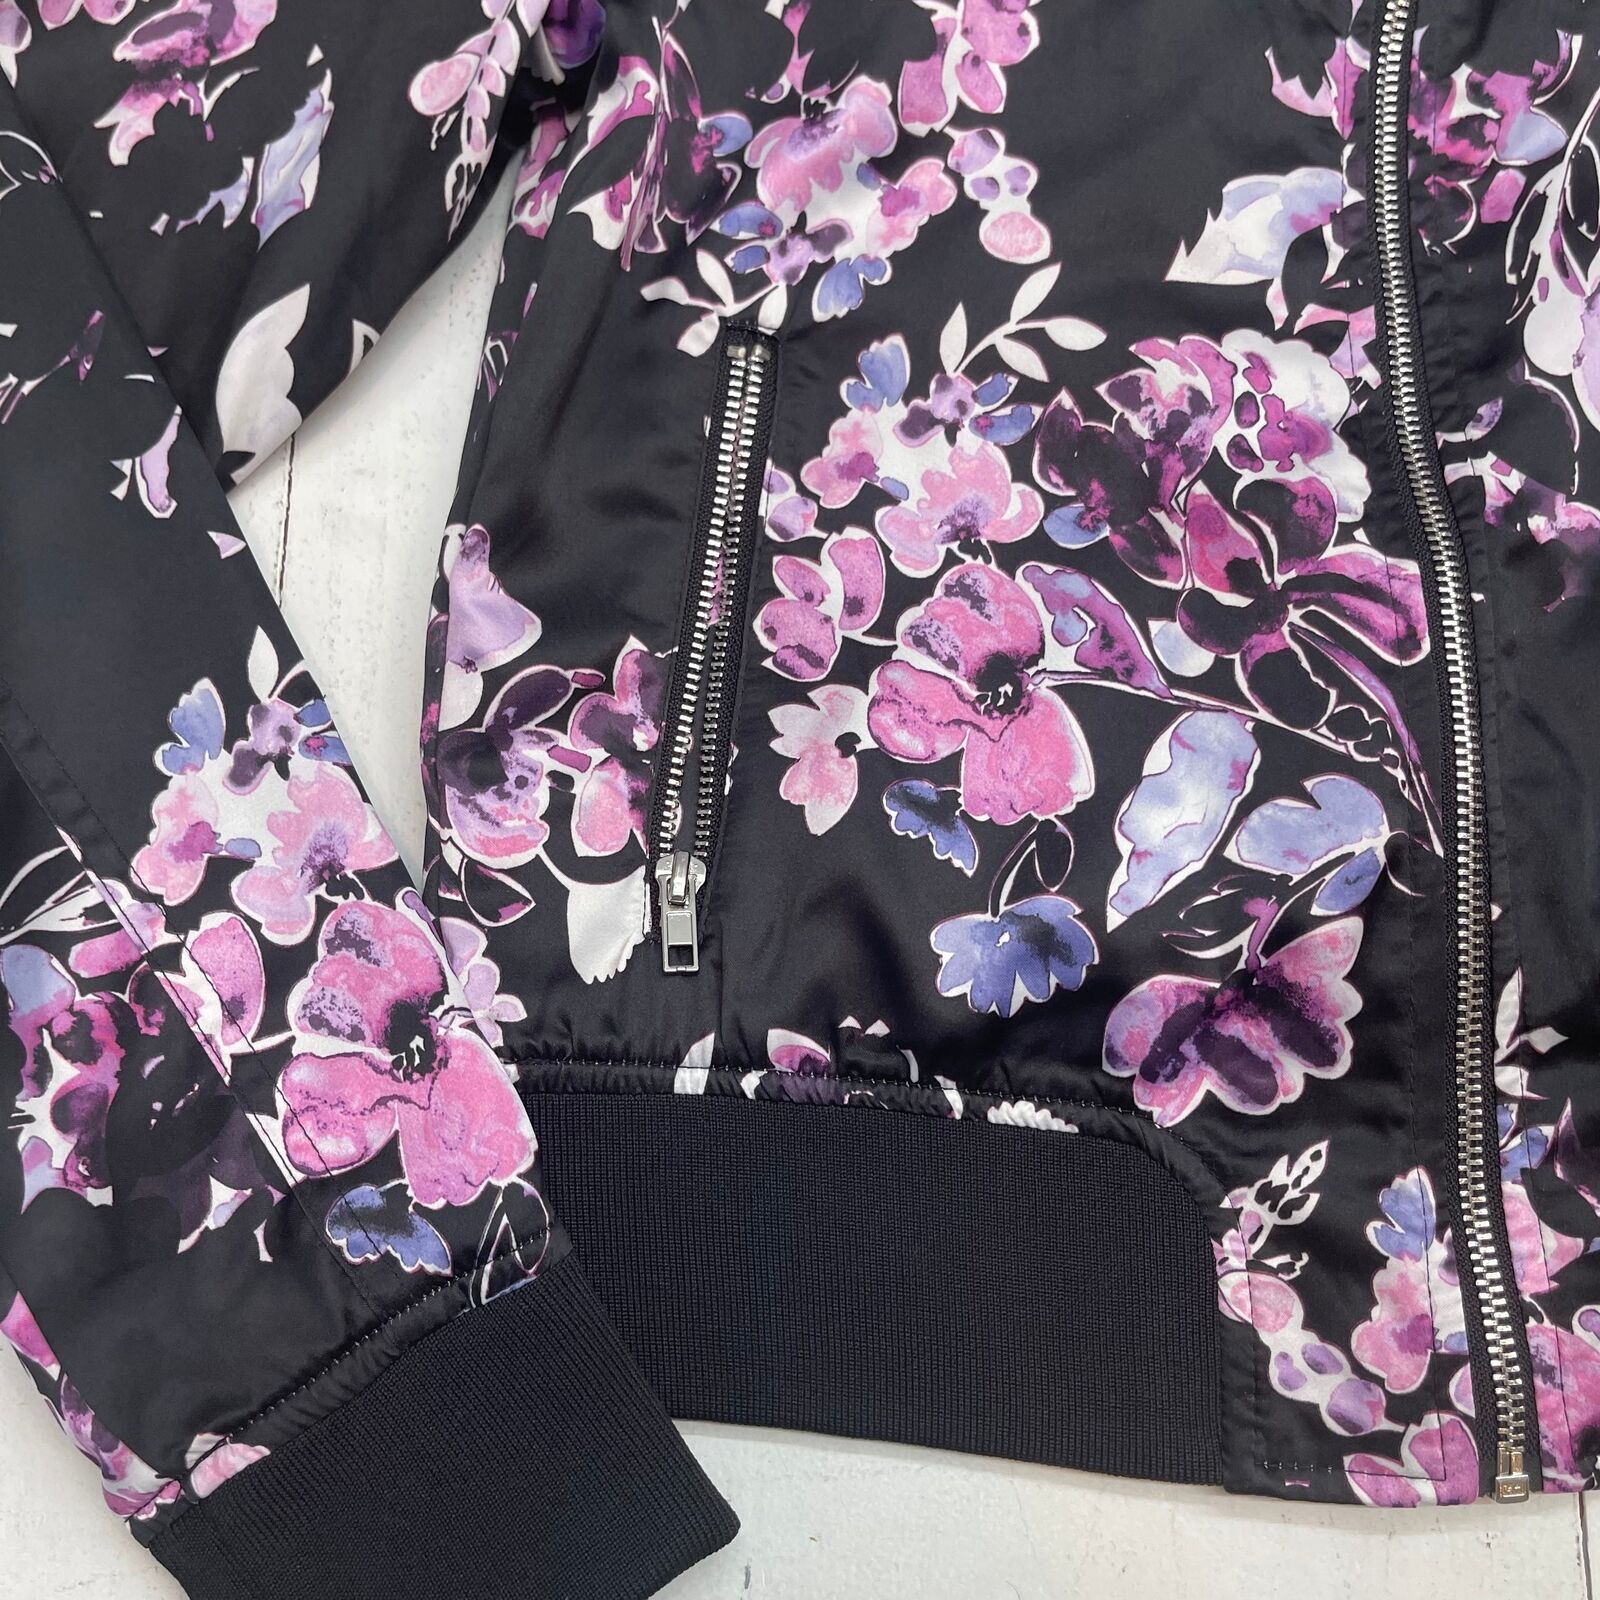 ANA A New Approach Black Floral Satin Bomber Jacket Women's Size